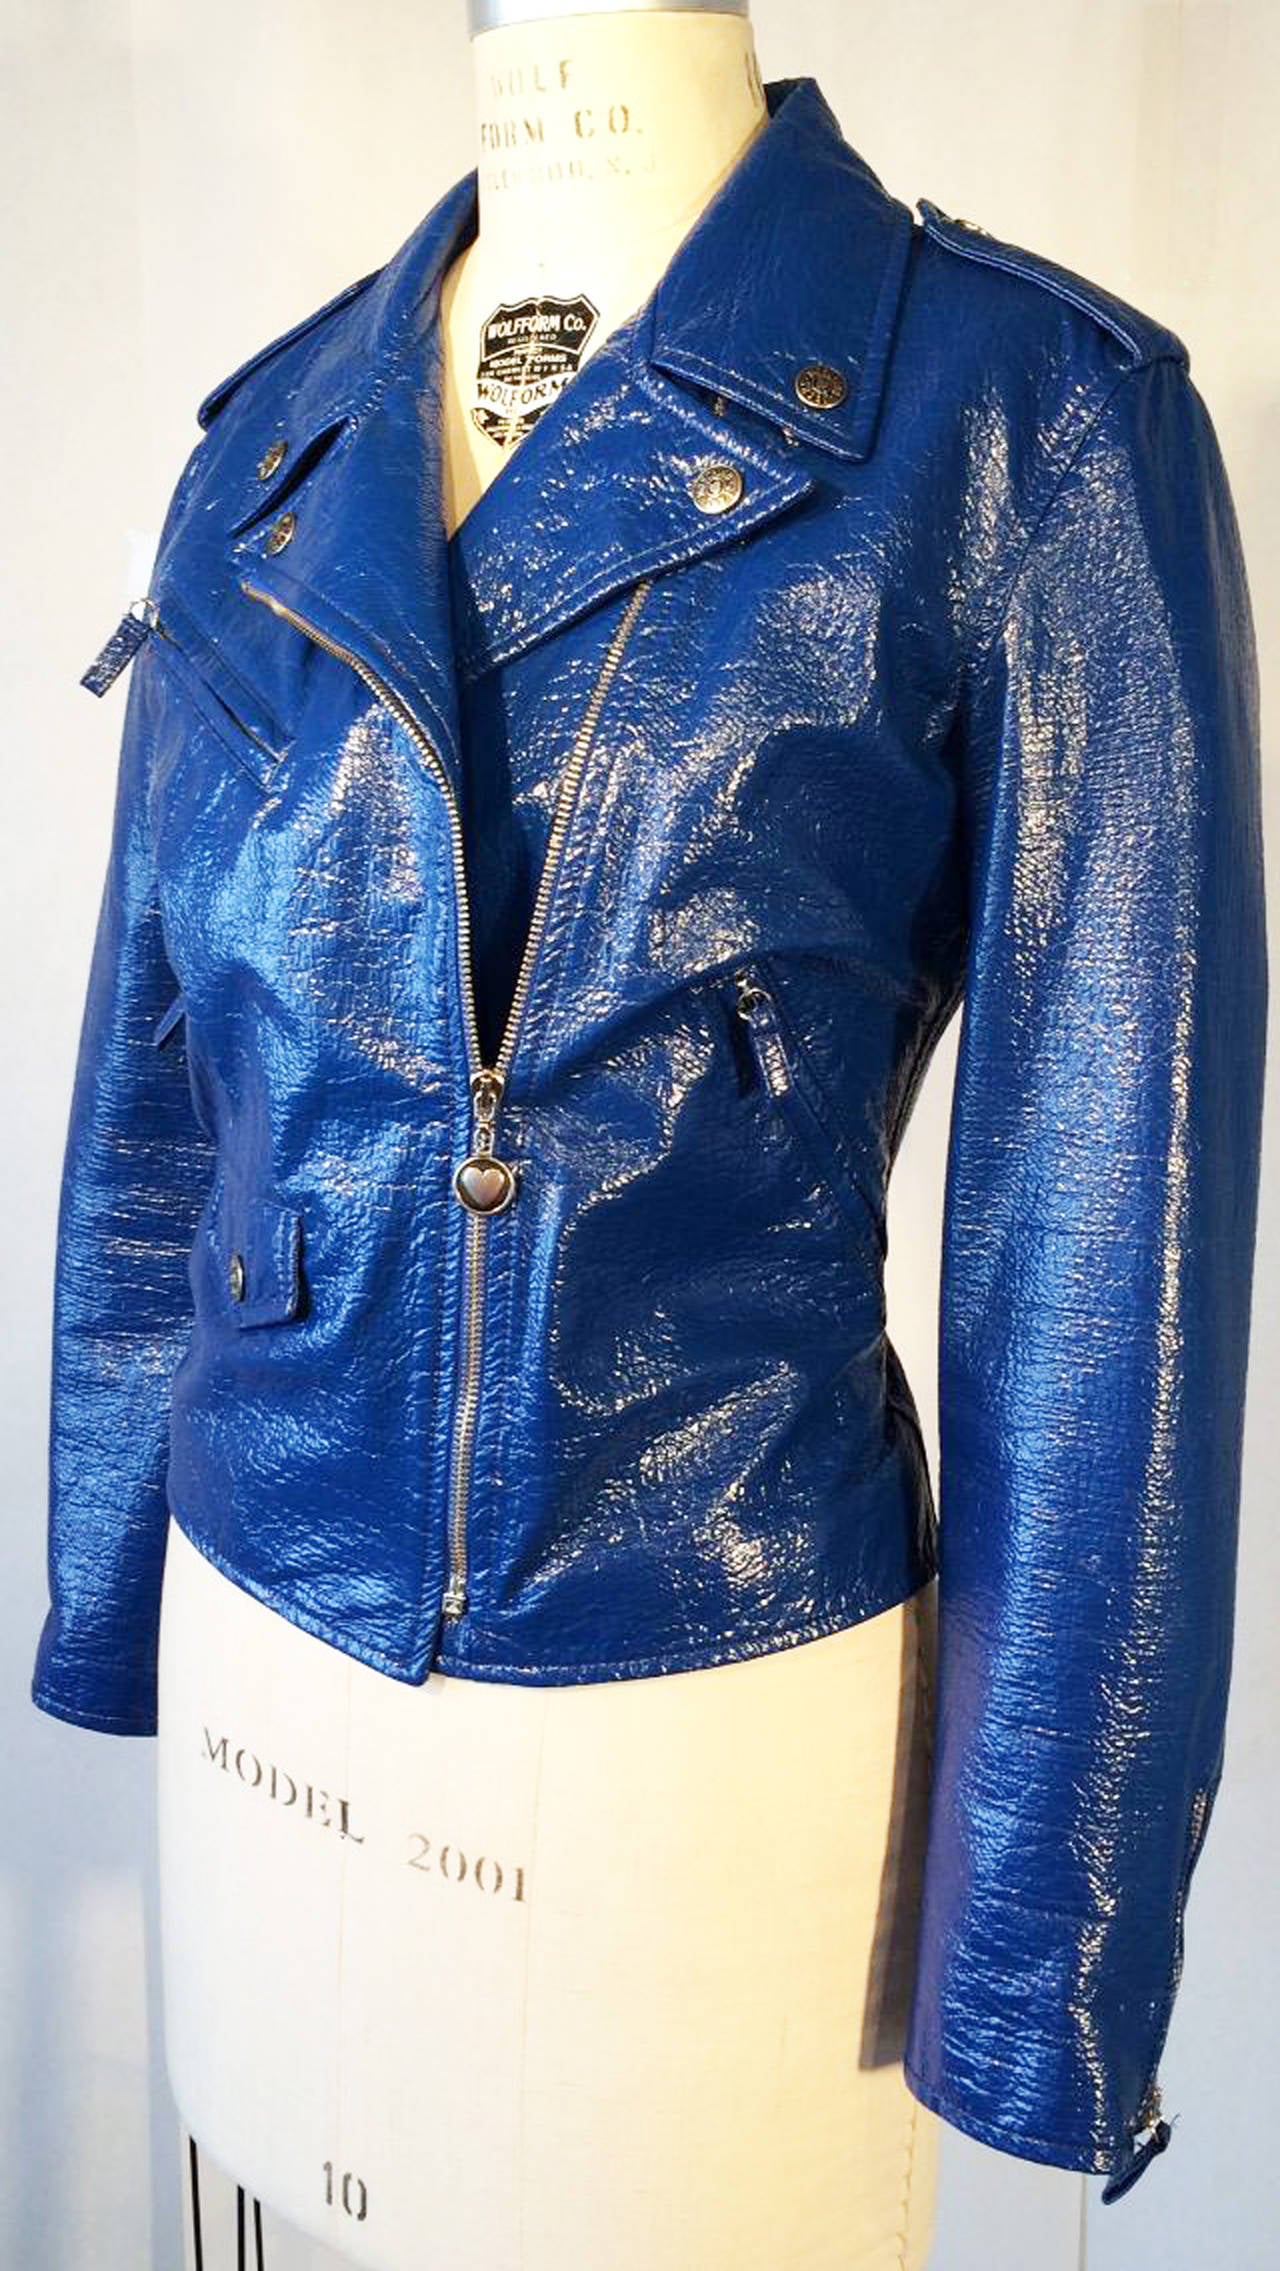 A fine and rare vintage Moschino vinyl motorcycle/biker jacket. Vibrant blue crinkle patent vinyl item fully silky lined with zipper and snap closures. Pristine appears unworn.